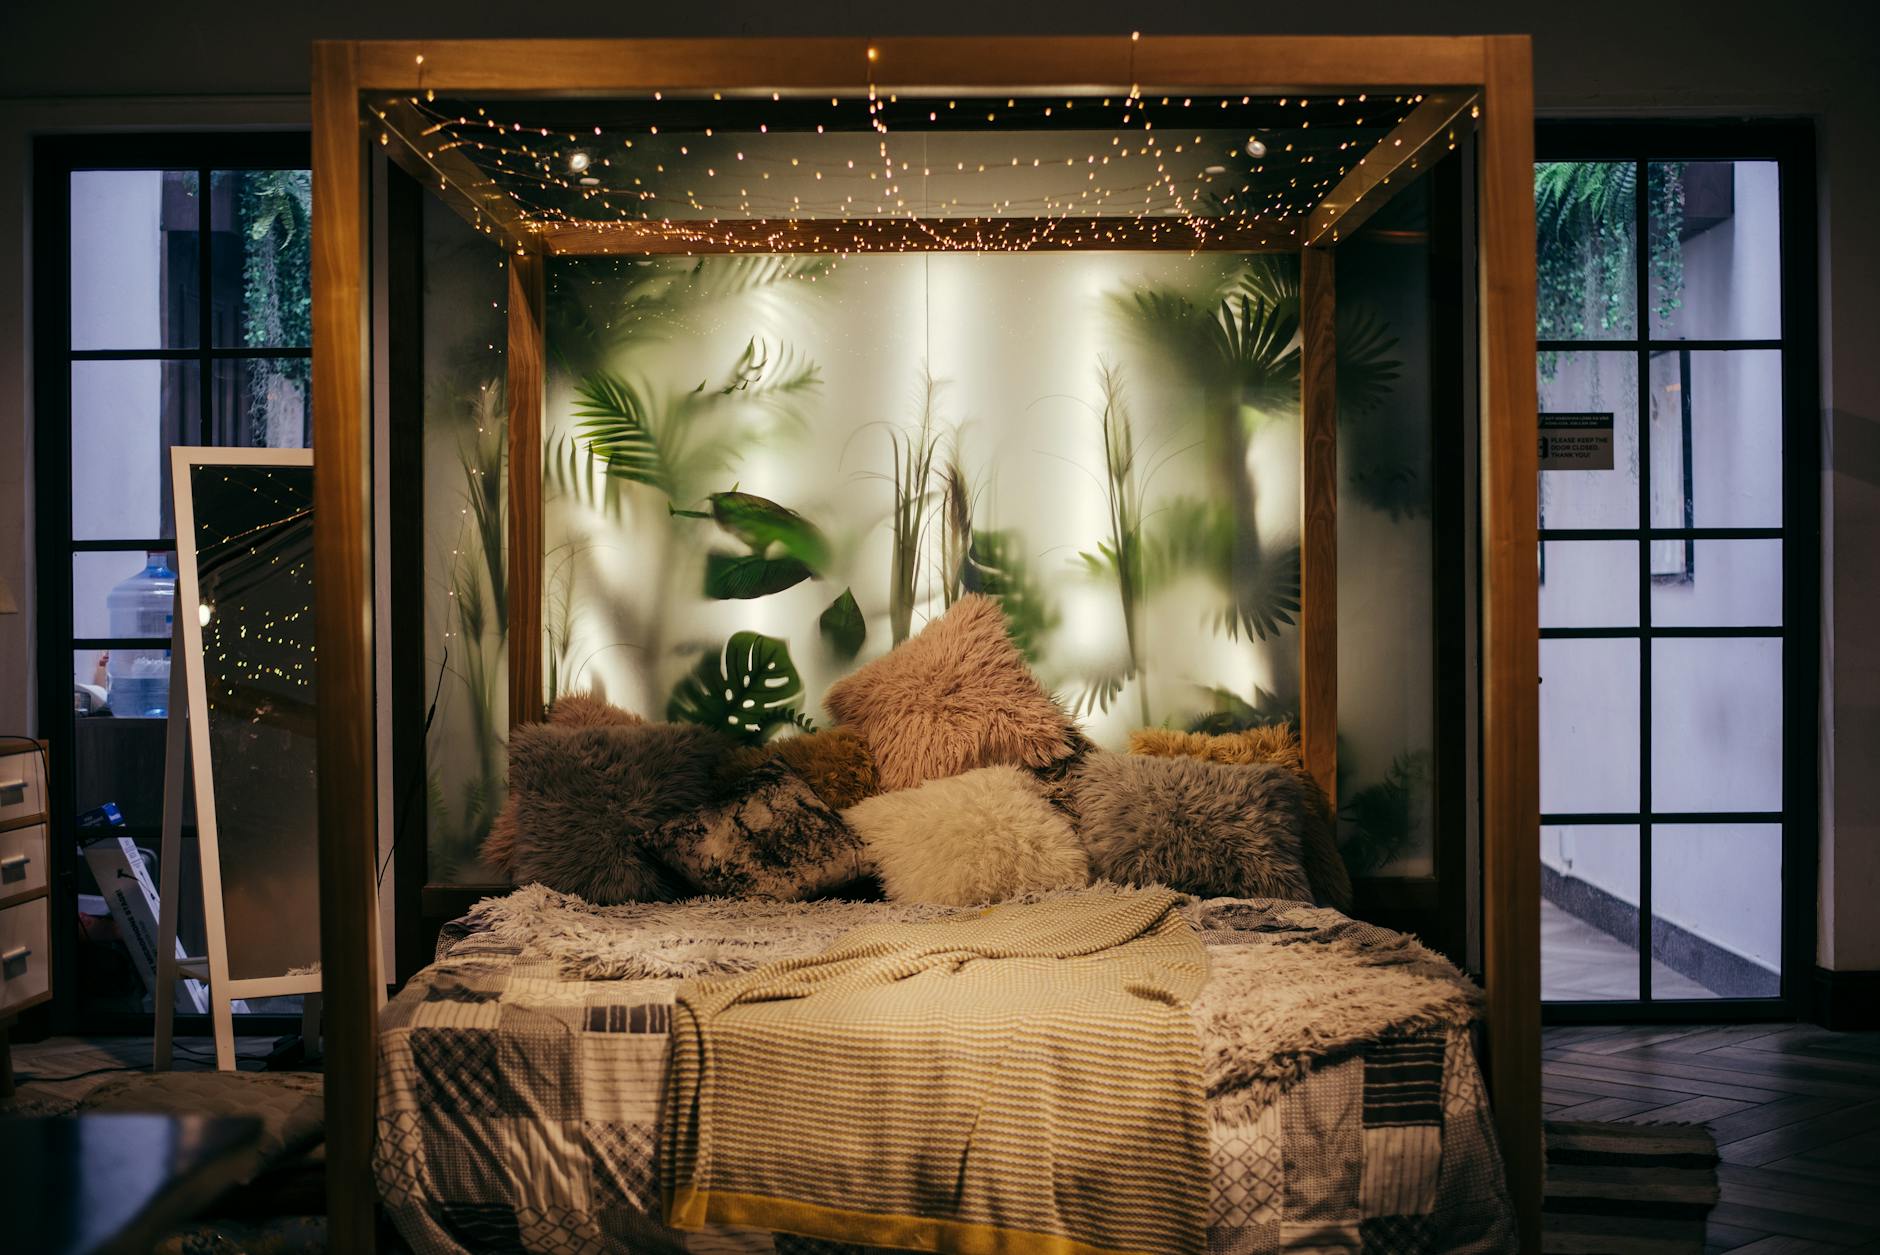 a super cosy (with slightly too furry pillows) bed surrounded by a bedframe with fairy lights and a milky glass wall in the back with green palm trees behind it